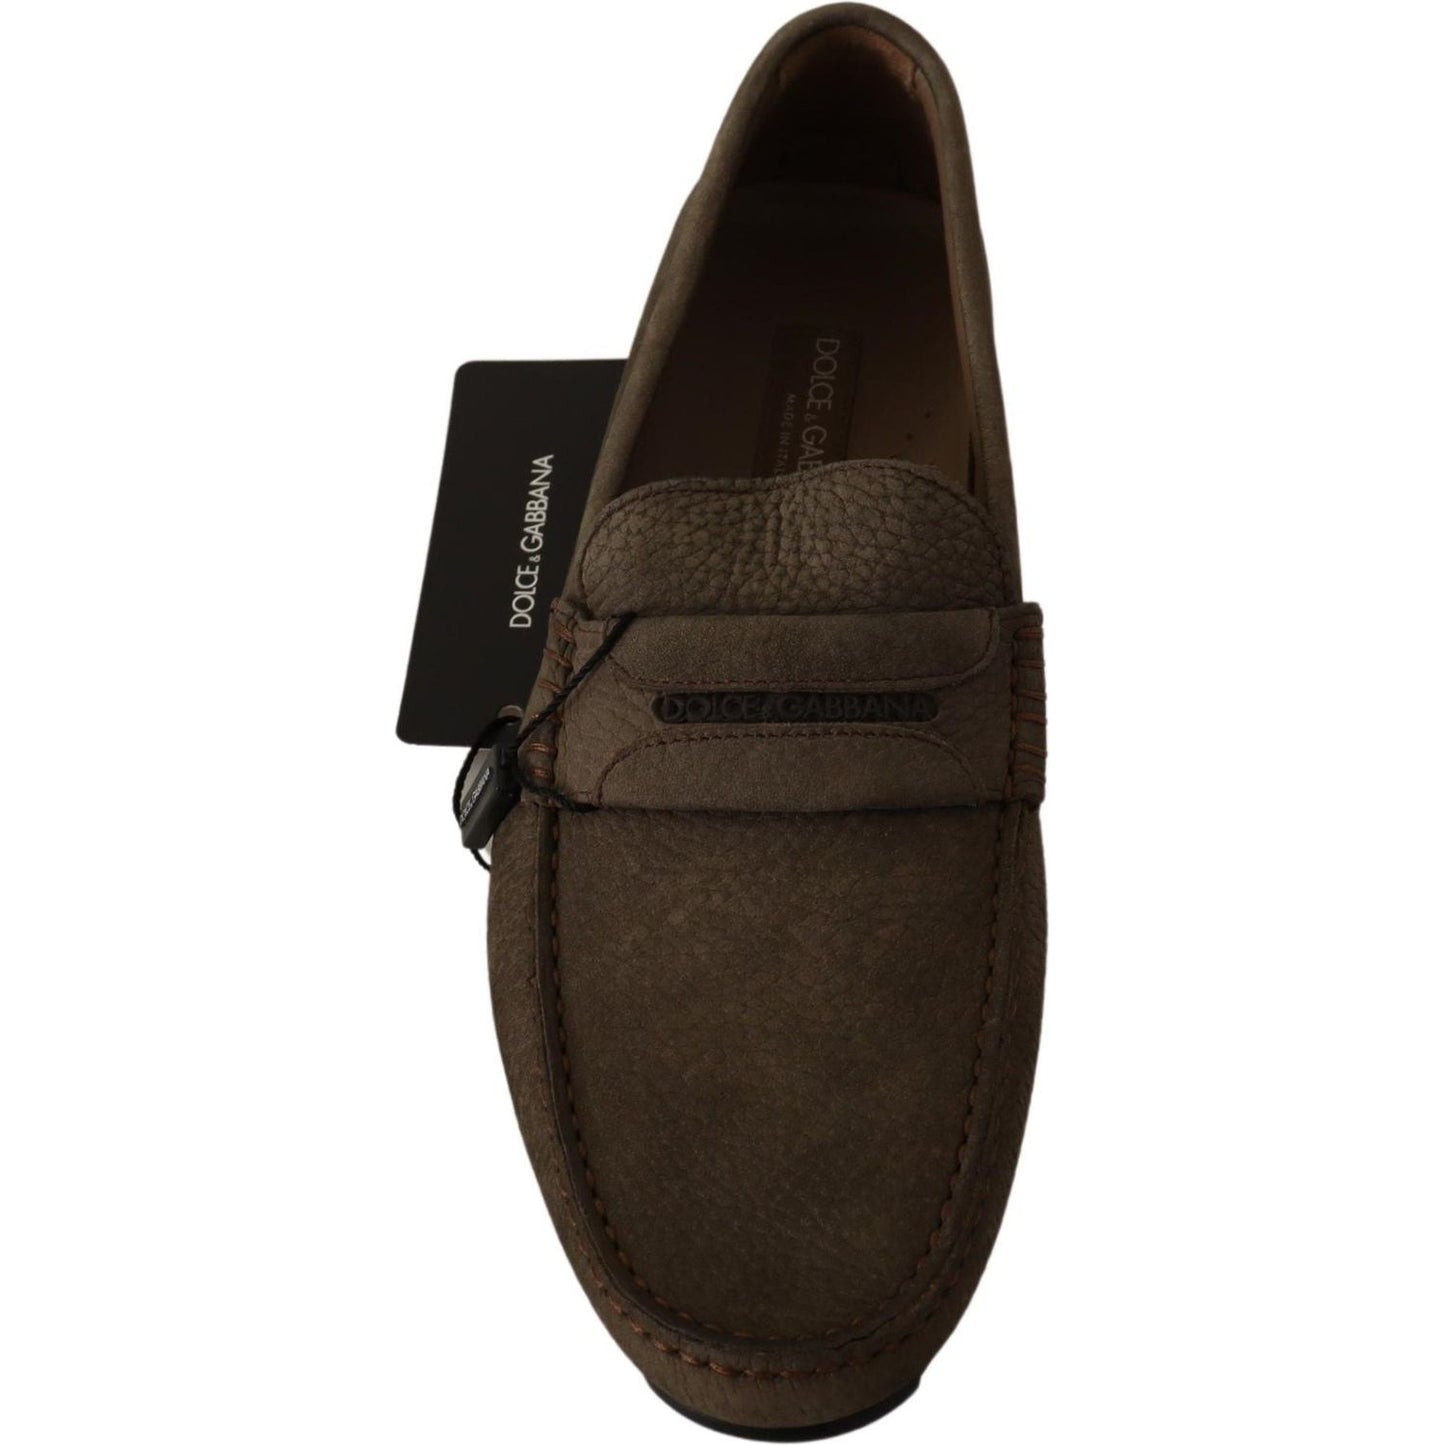 Dolce & Gabbana Elegant Brown Leather Loafers brown-leather-flat-slip-on-mocassin-shoes MAN LOAFERS